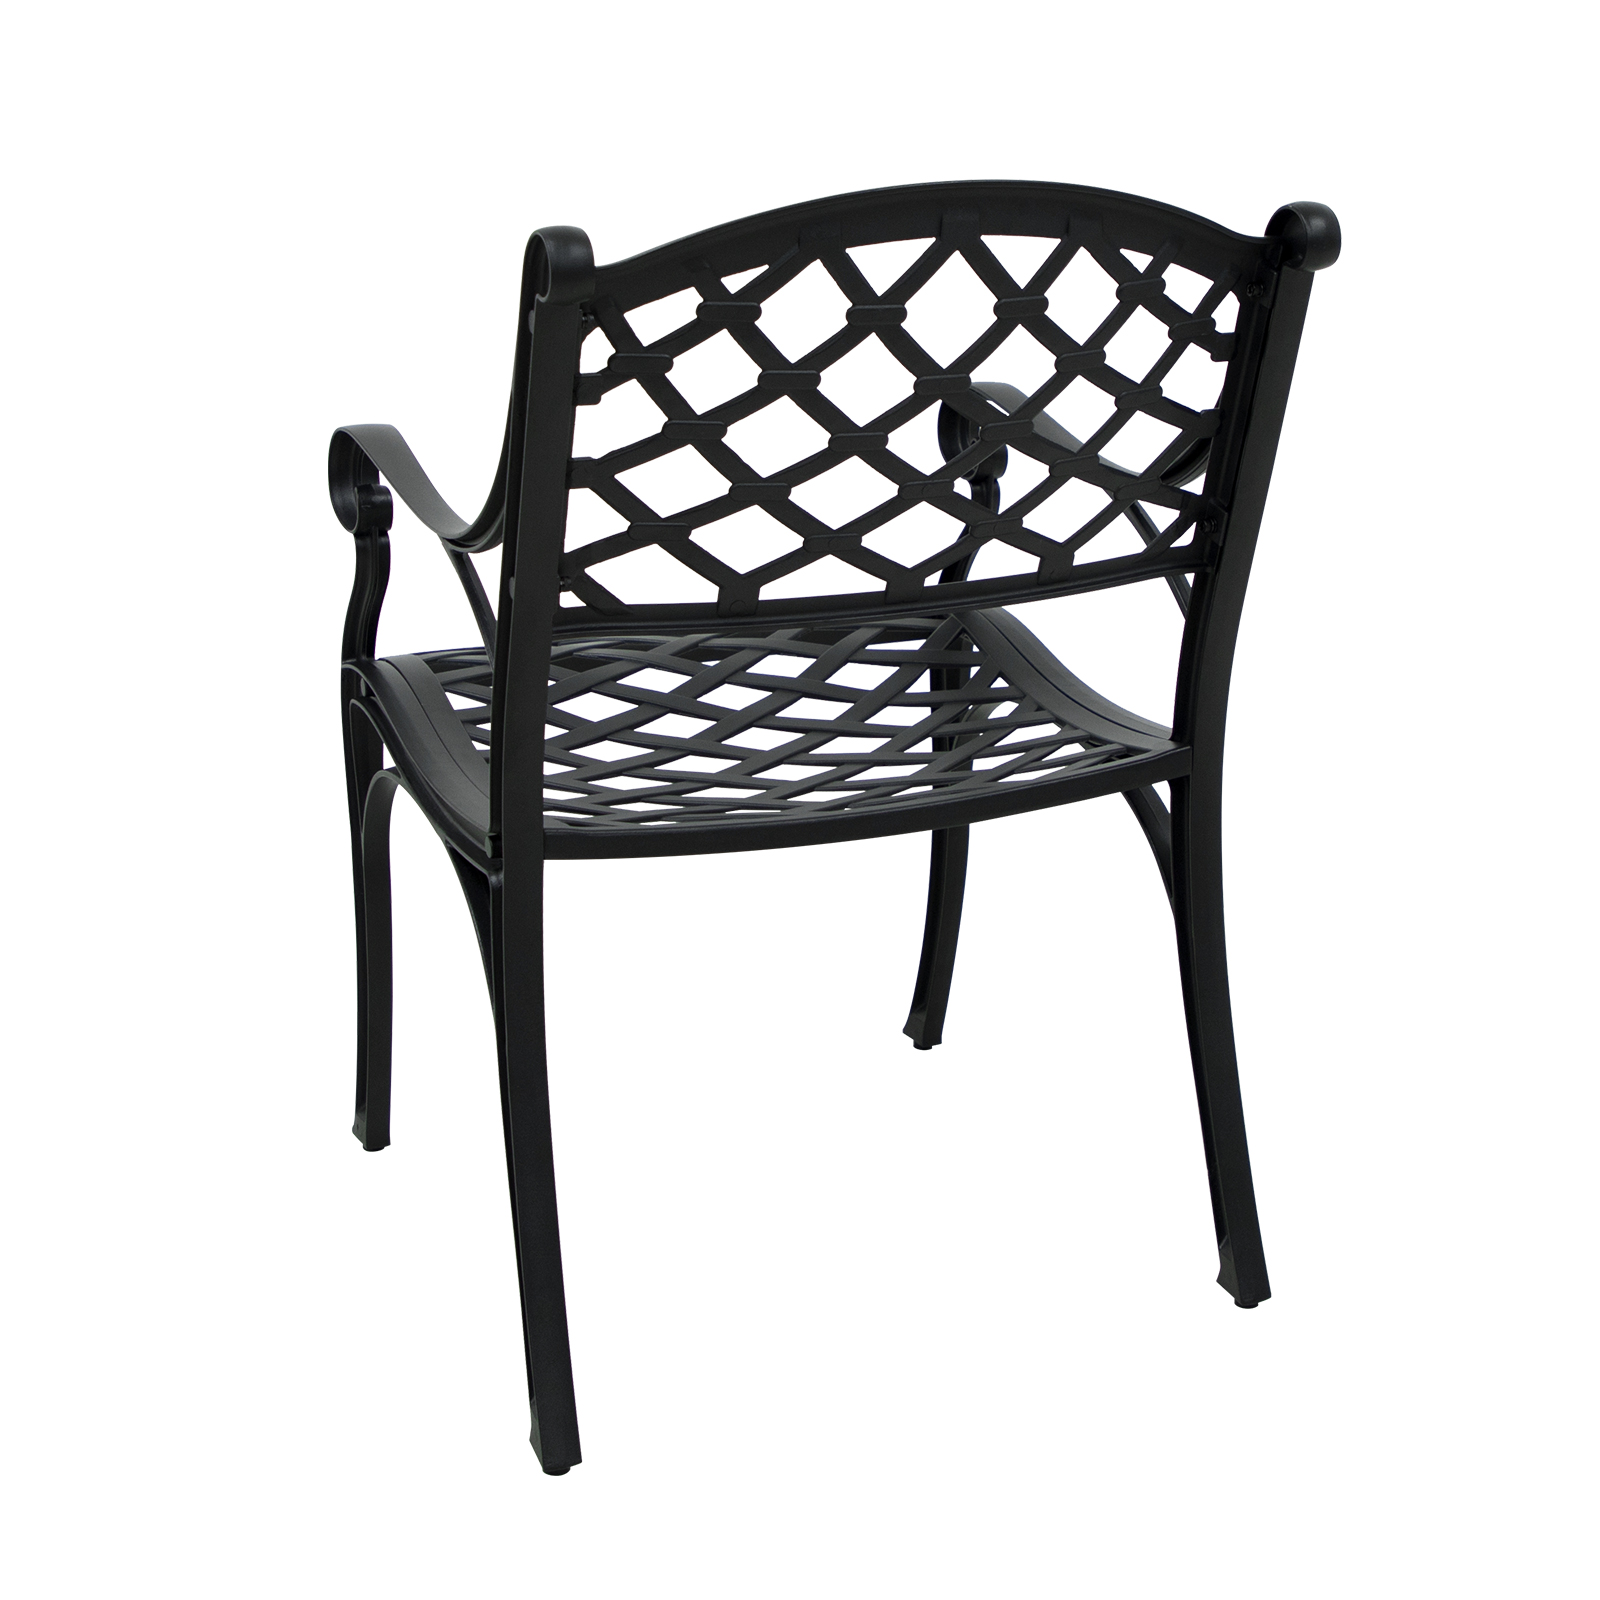 CoSoTower 2 Piece Outdoor Dining Chairs, Cast Aluminum Chairs With Armrest, Patio Bistro Chair Set Of 2 For Garden, Backyard, Lattice Design 2 Chairs - image 2 of 8